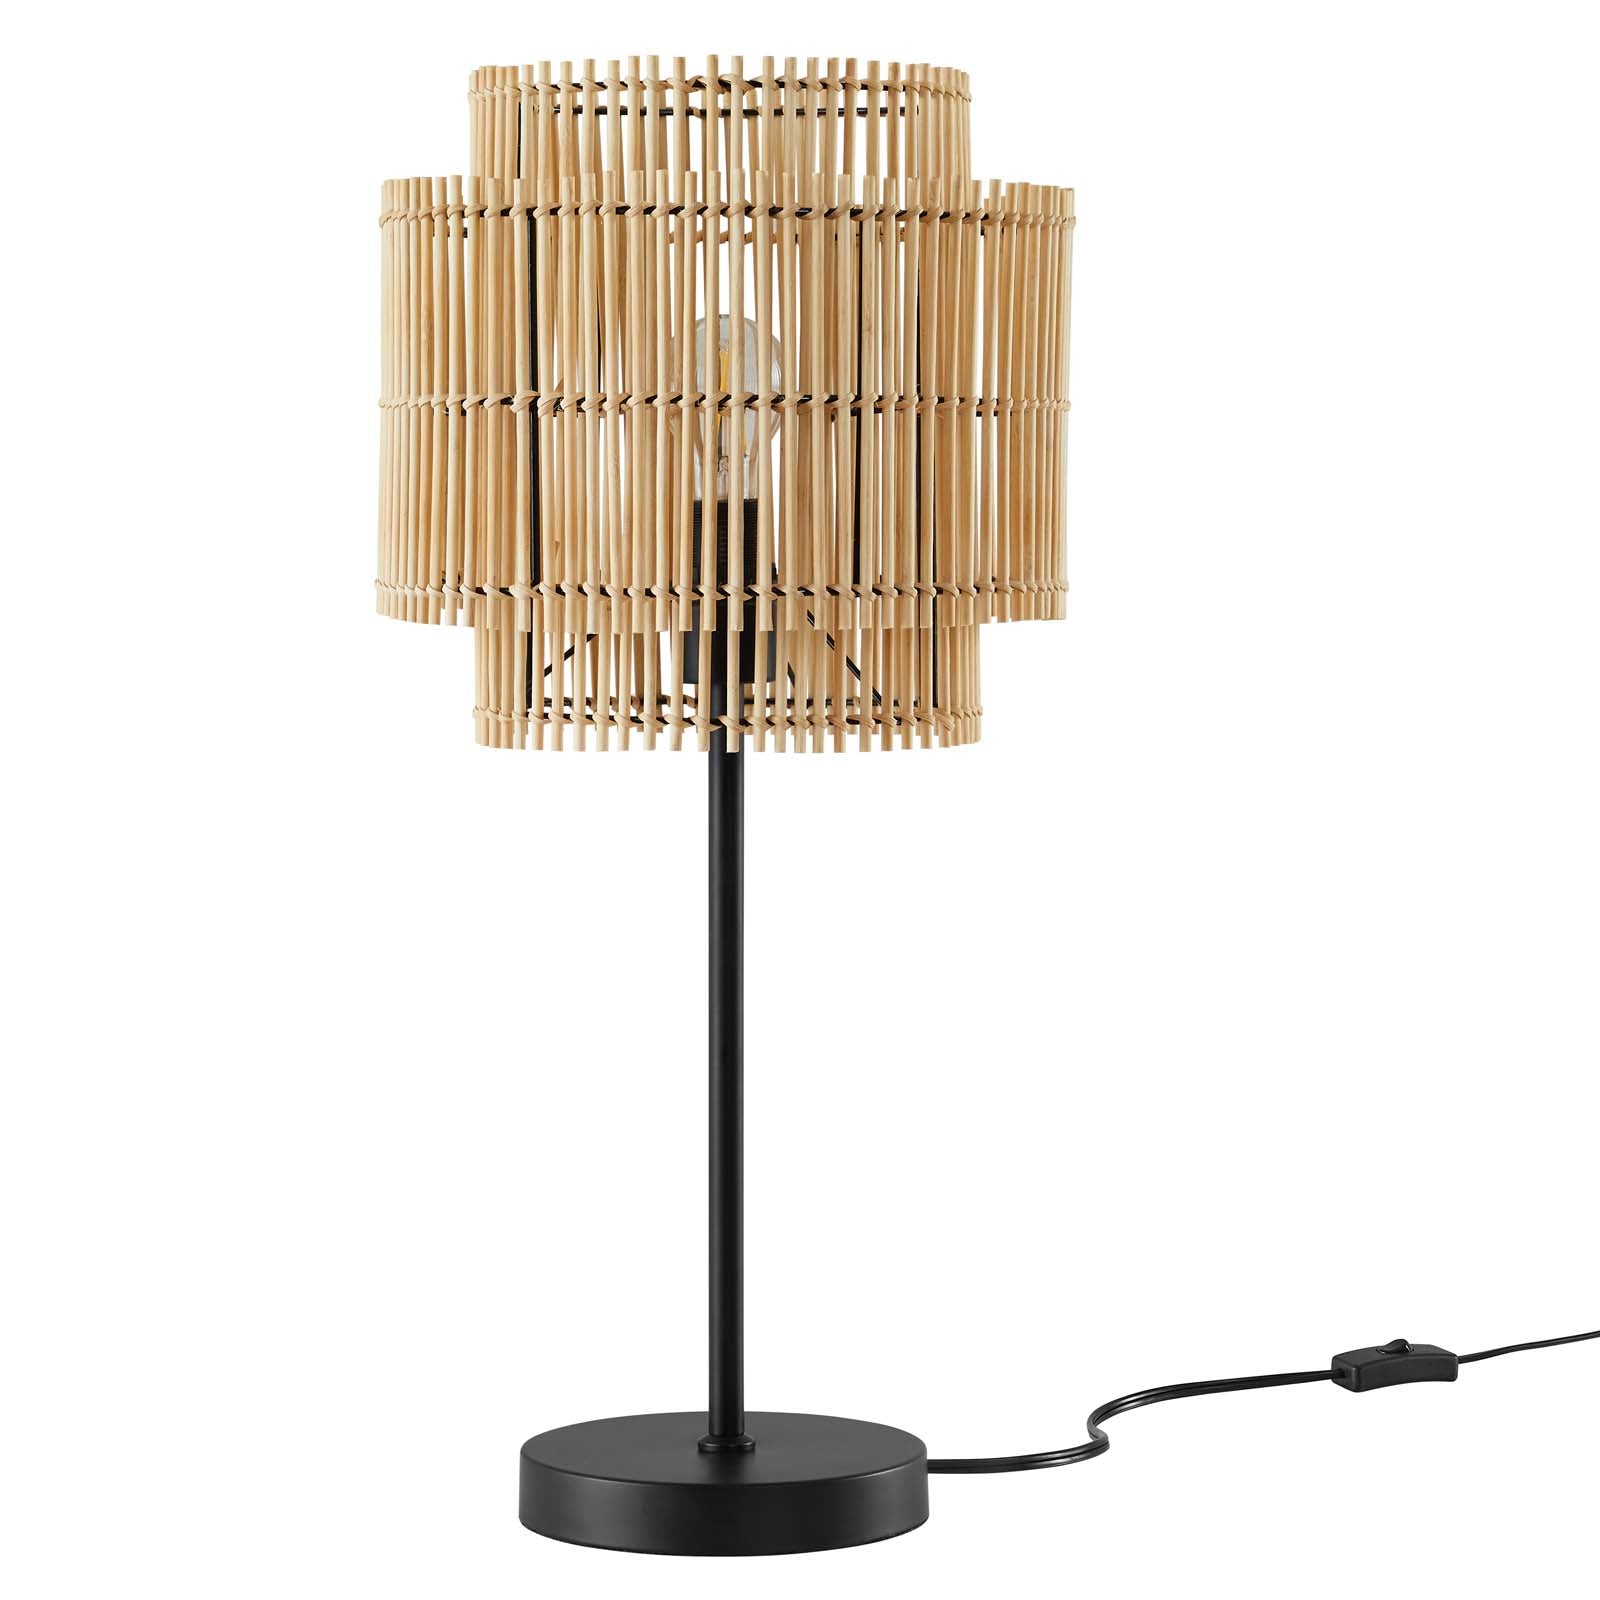 Modway Table Lamps - Nourish Bamboo Table Lamp Brown